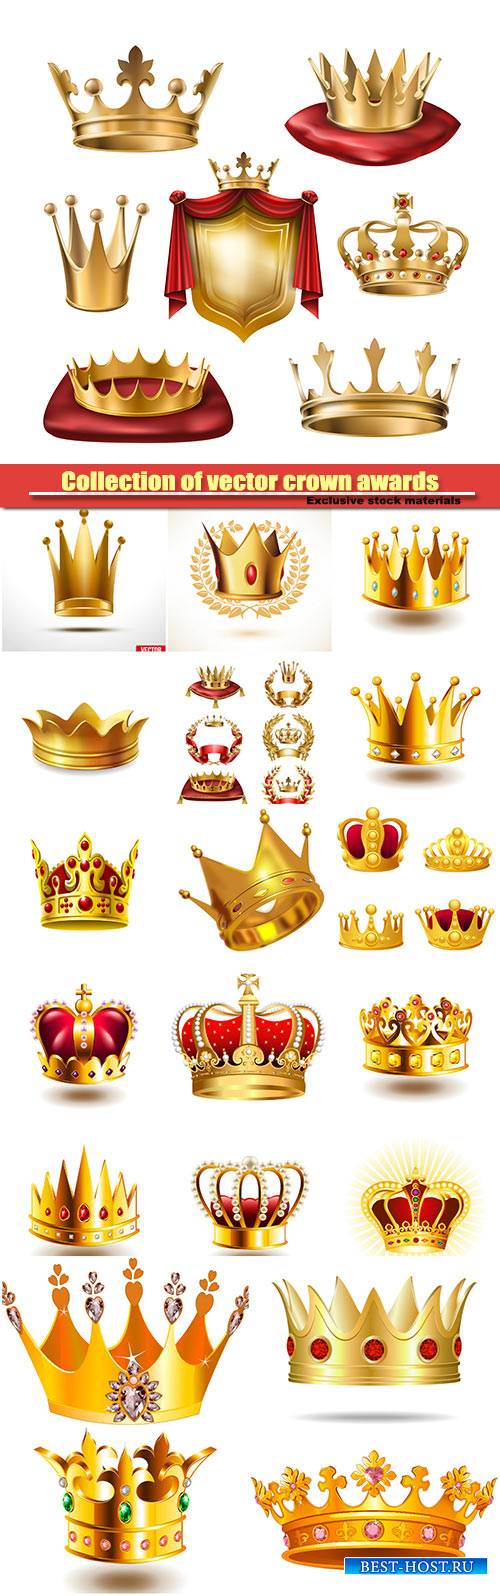 Collection of vector crown awards for winners of competitions, design eleme ...